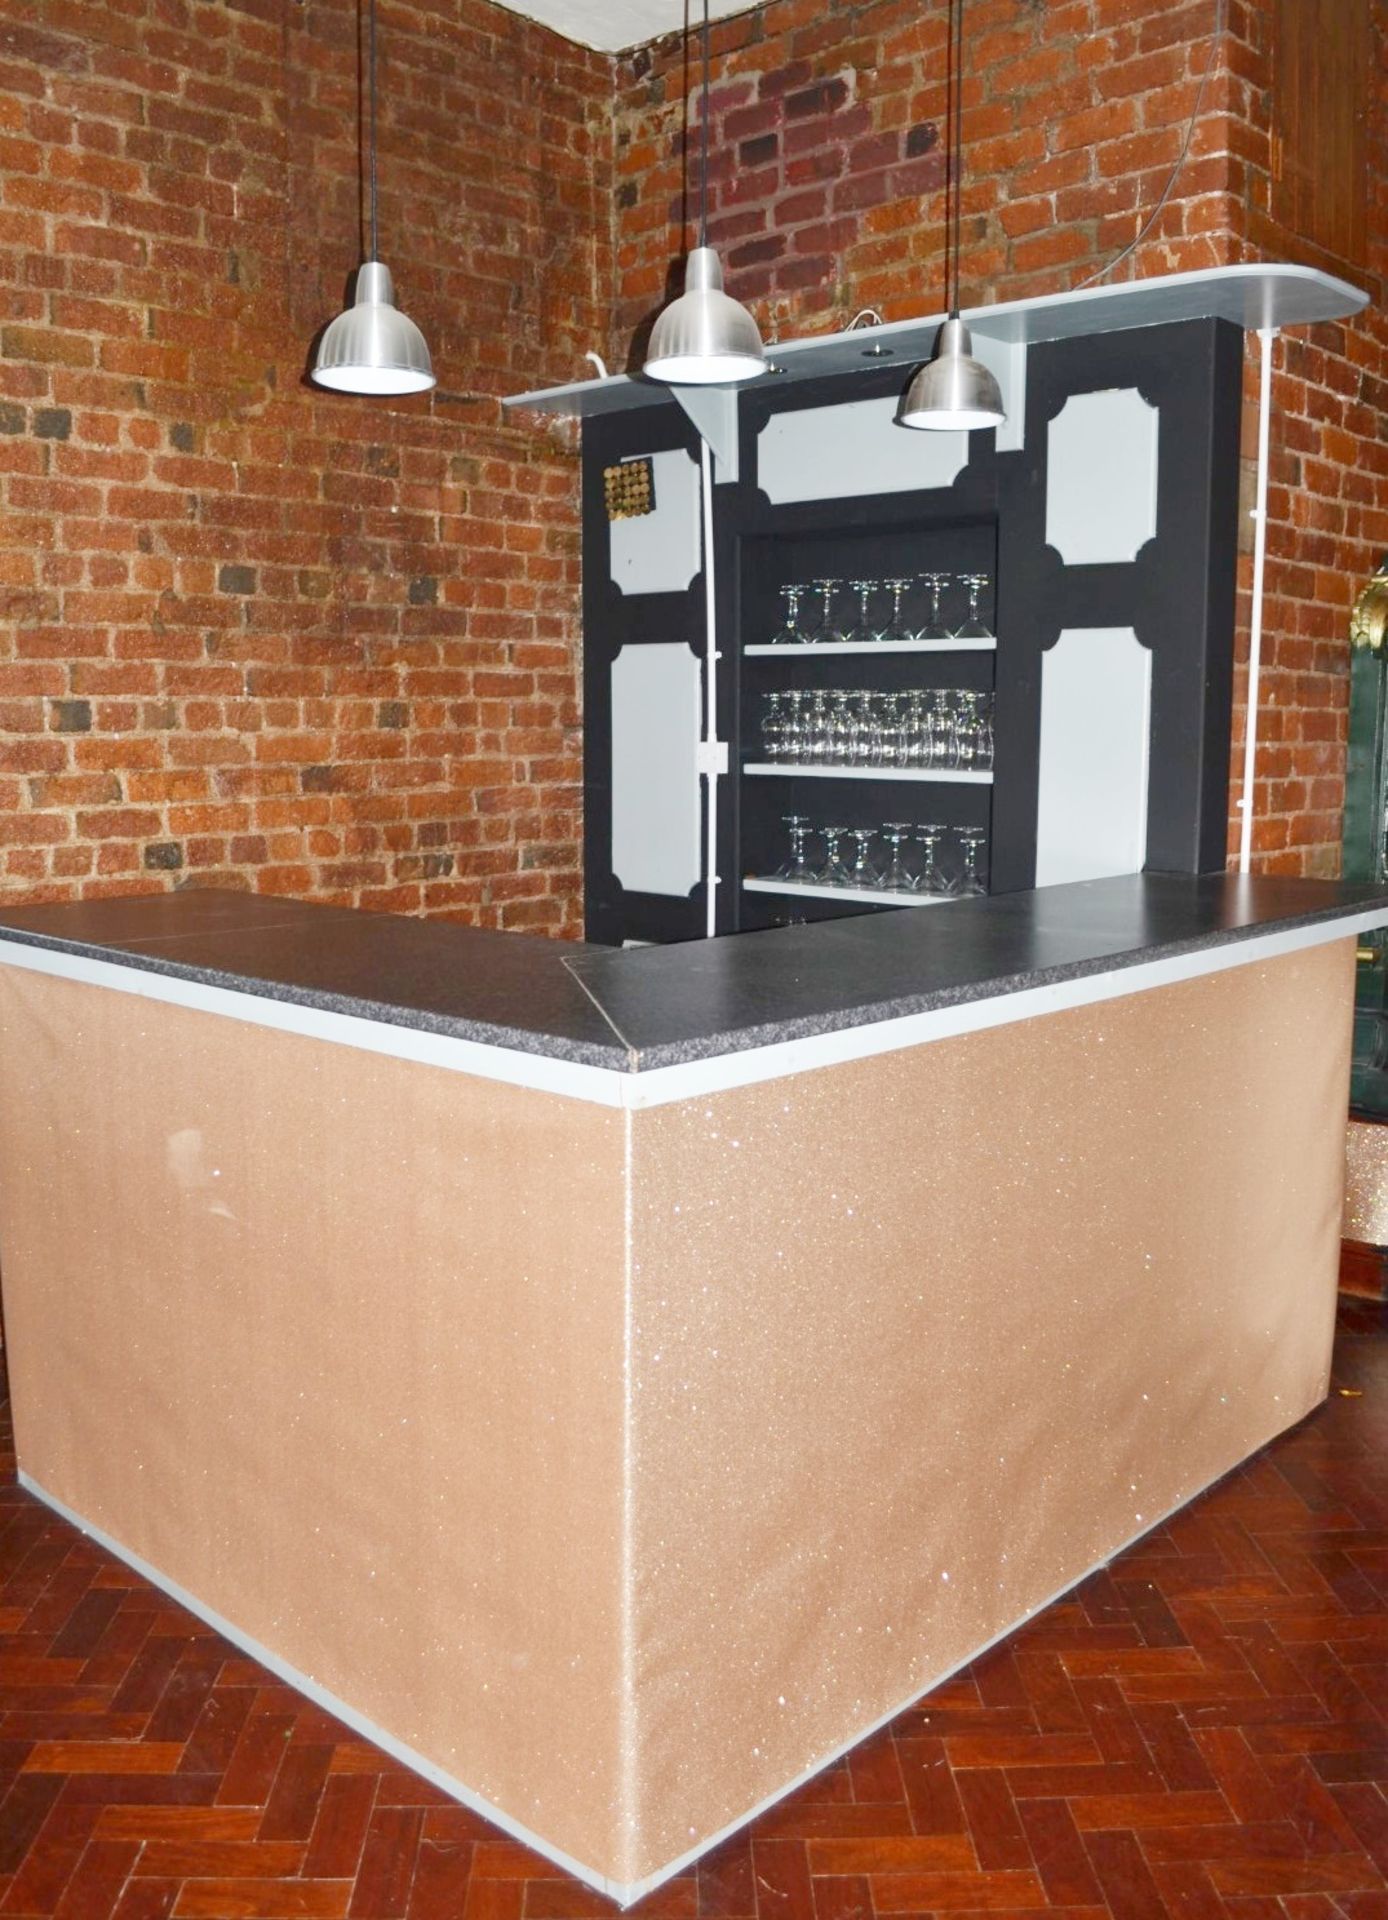 1 x Drinks Bar Finished in Black and Grey - Includes Backbar Shelf Unit and Three Pendant Lights - - Image 2 of 10